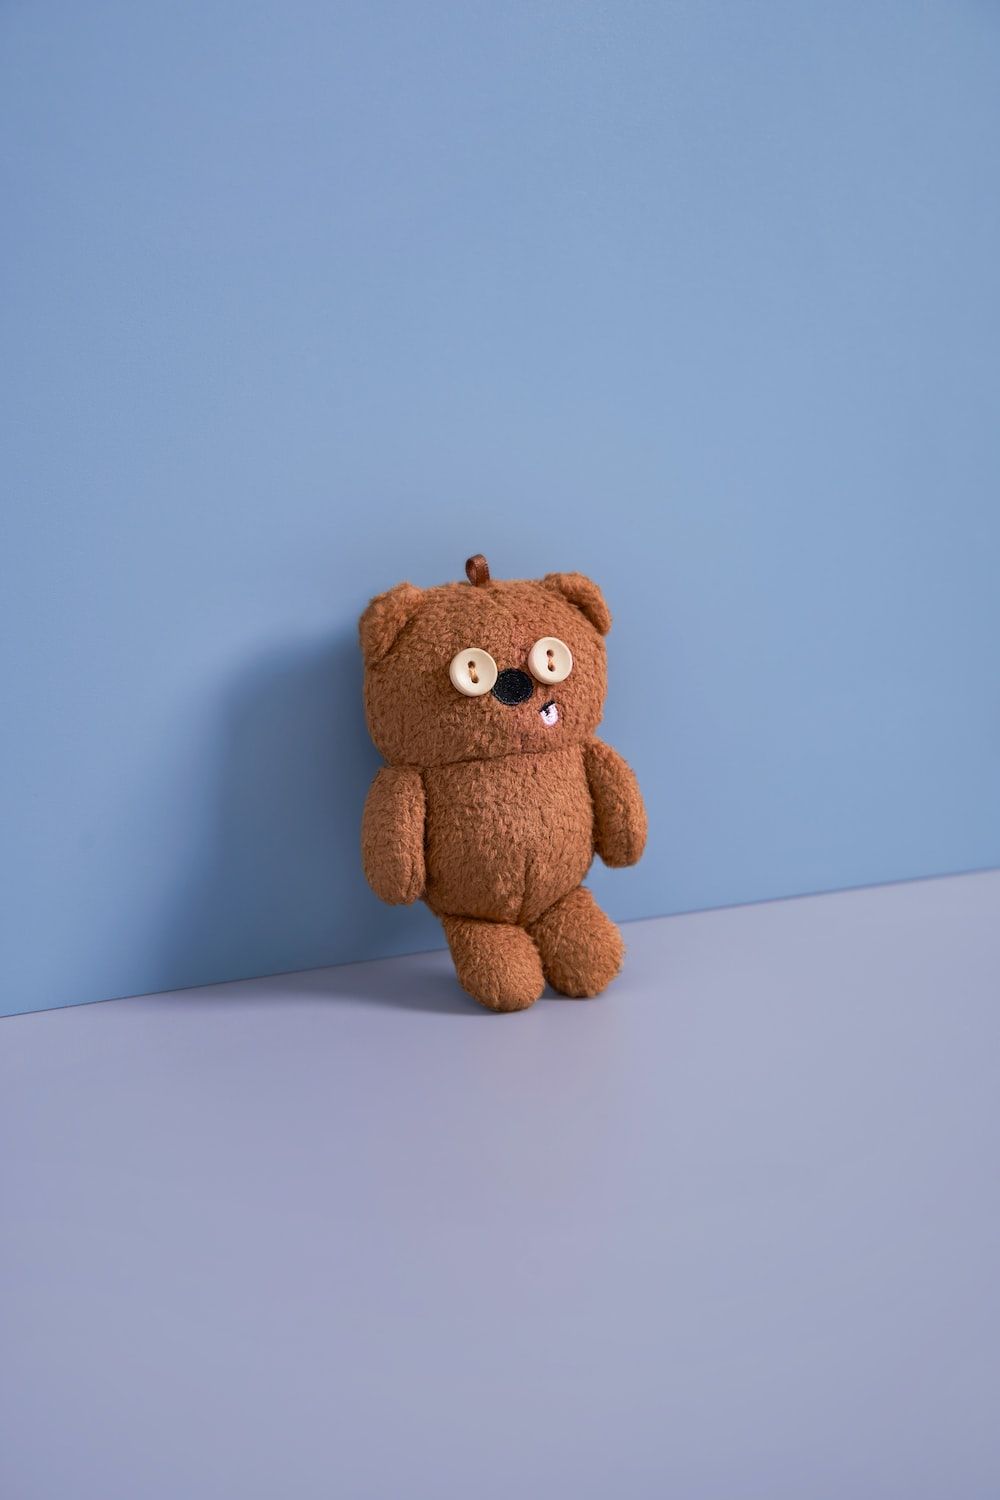 A brown teddy bear sitting on top of a table photo